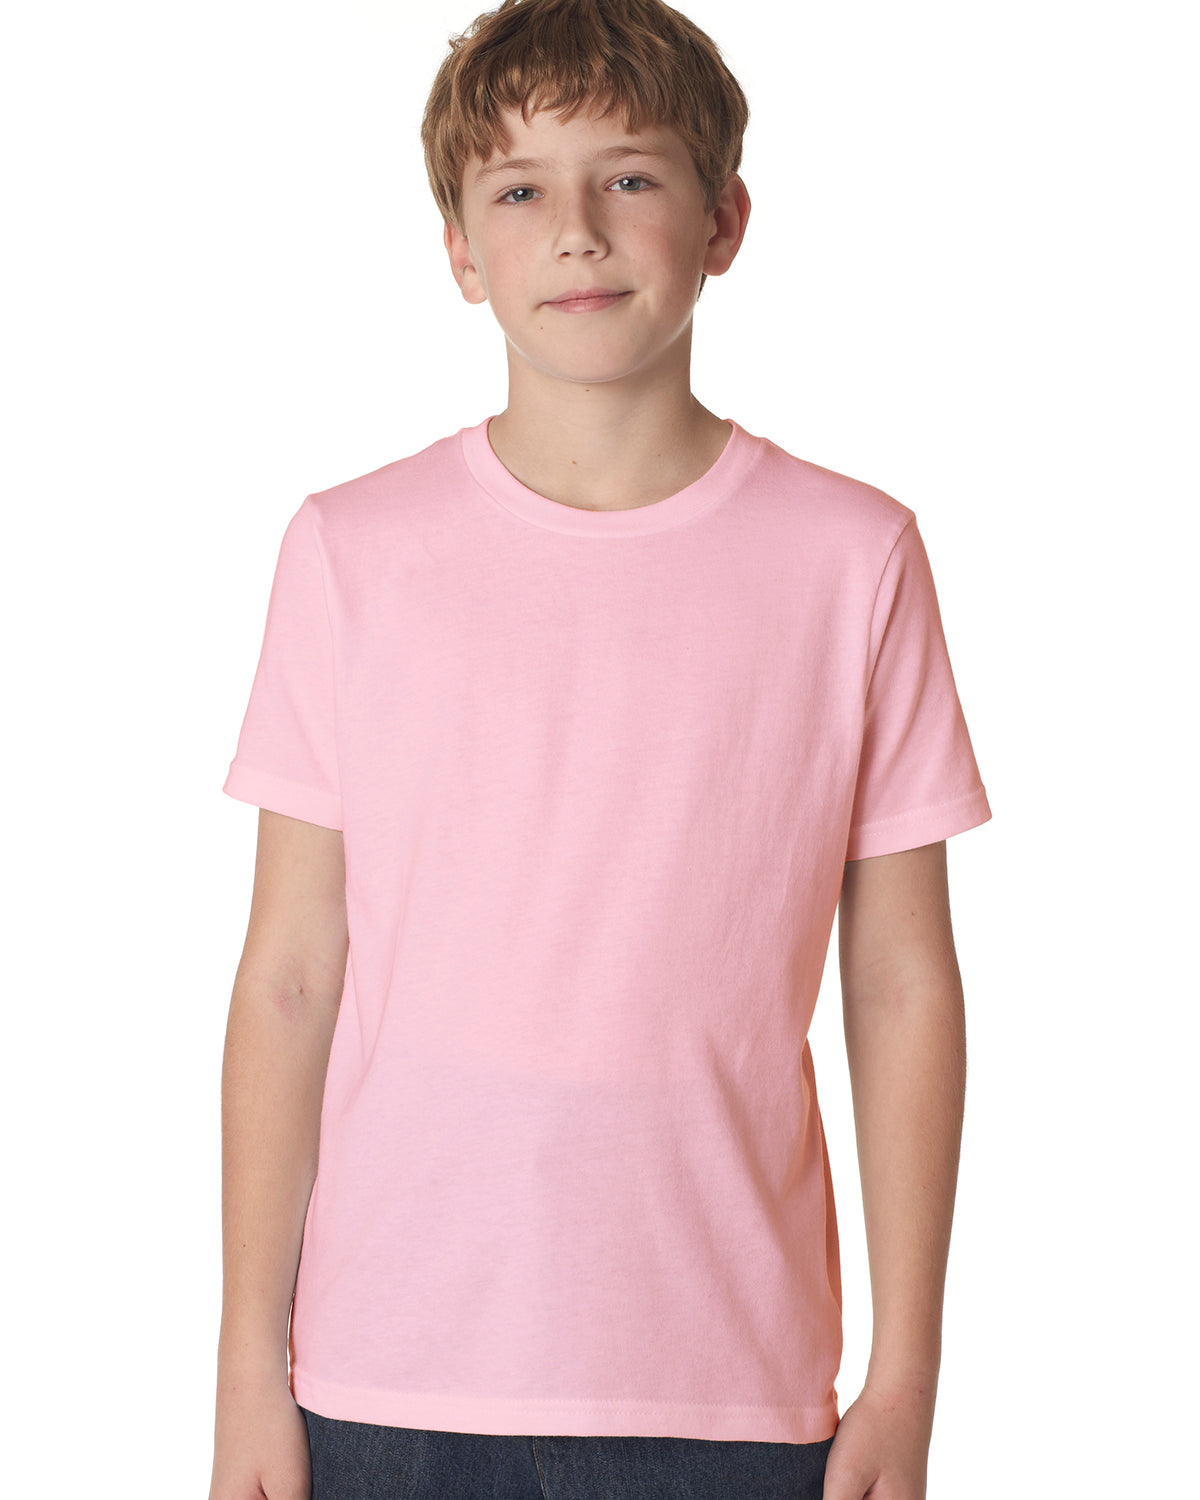 child model wearing next level youth tee in light pink